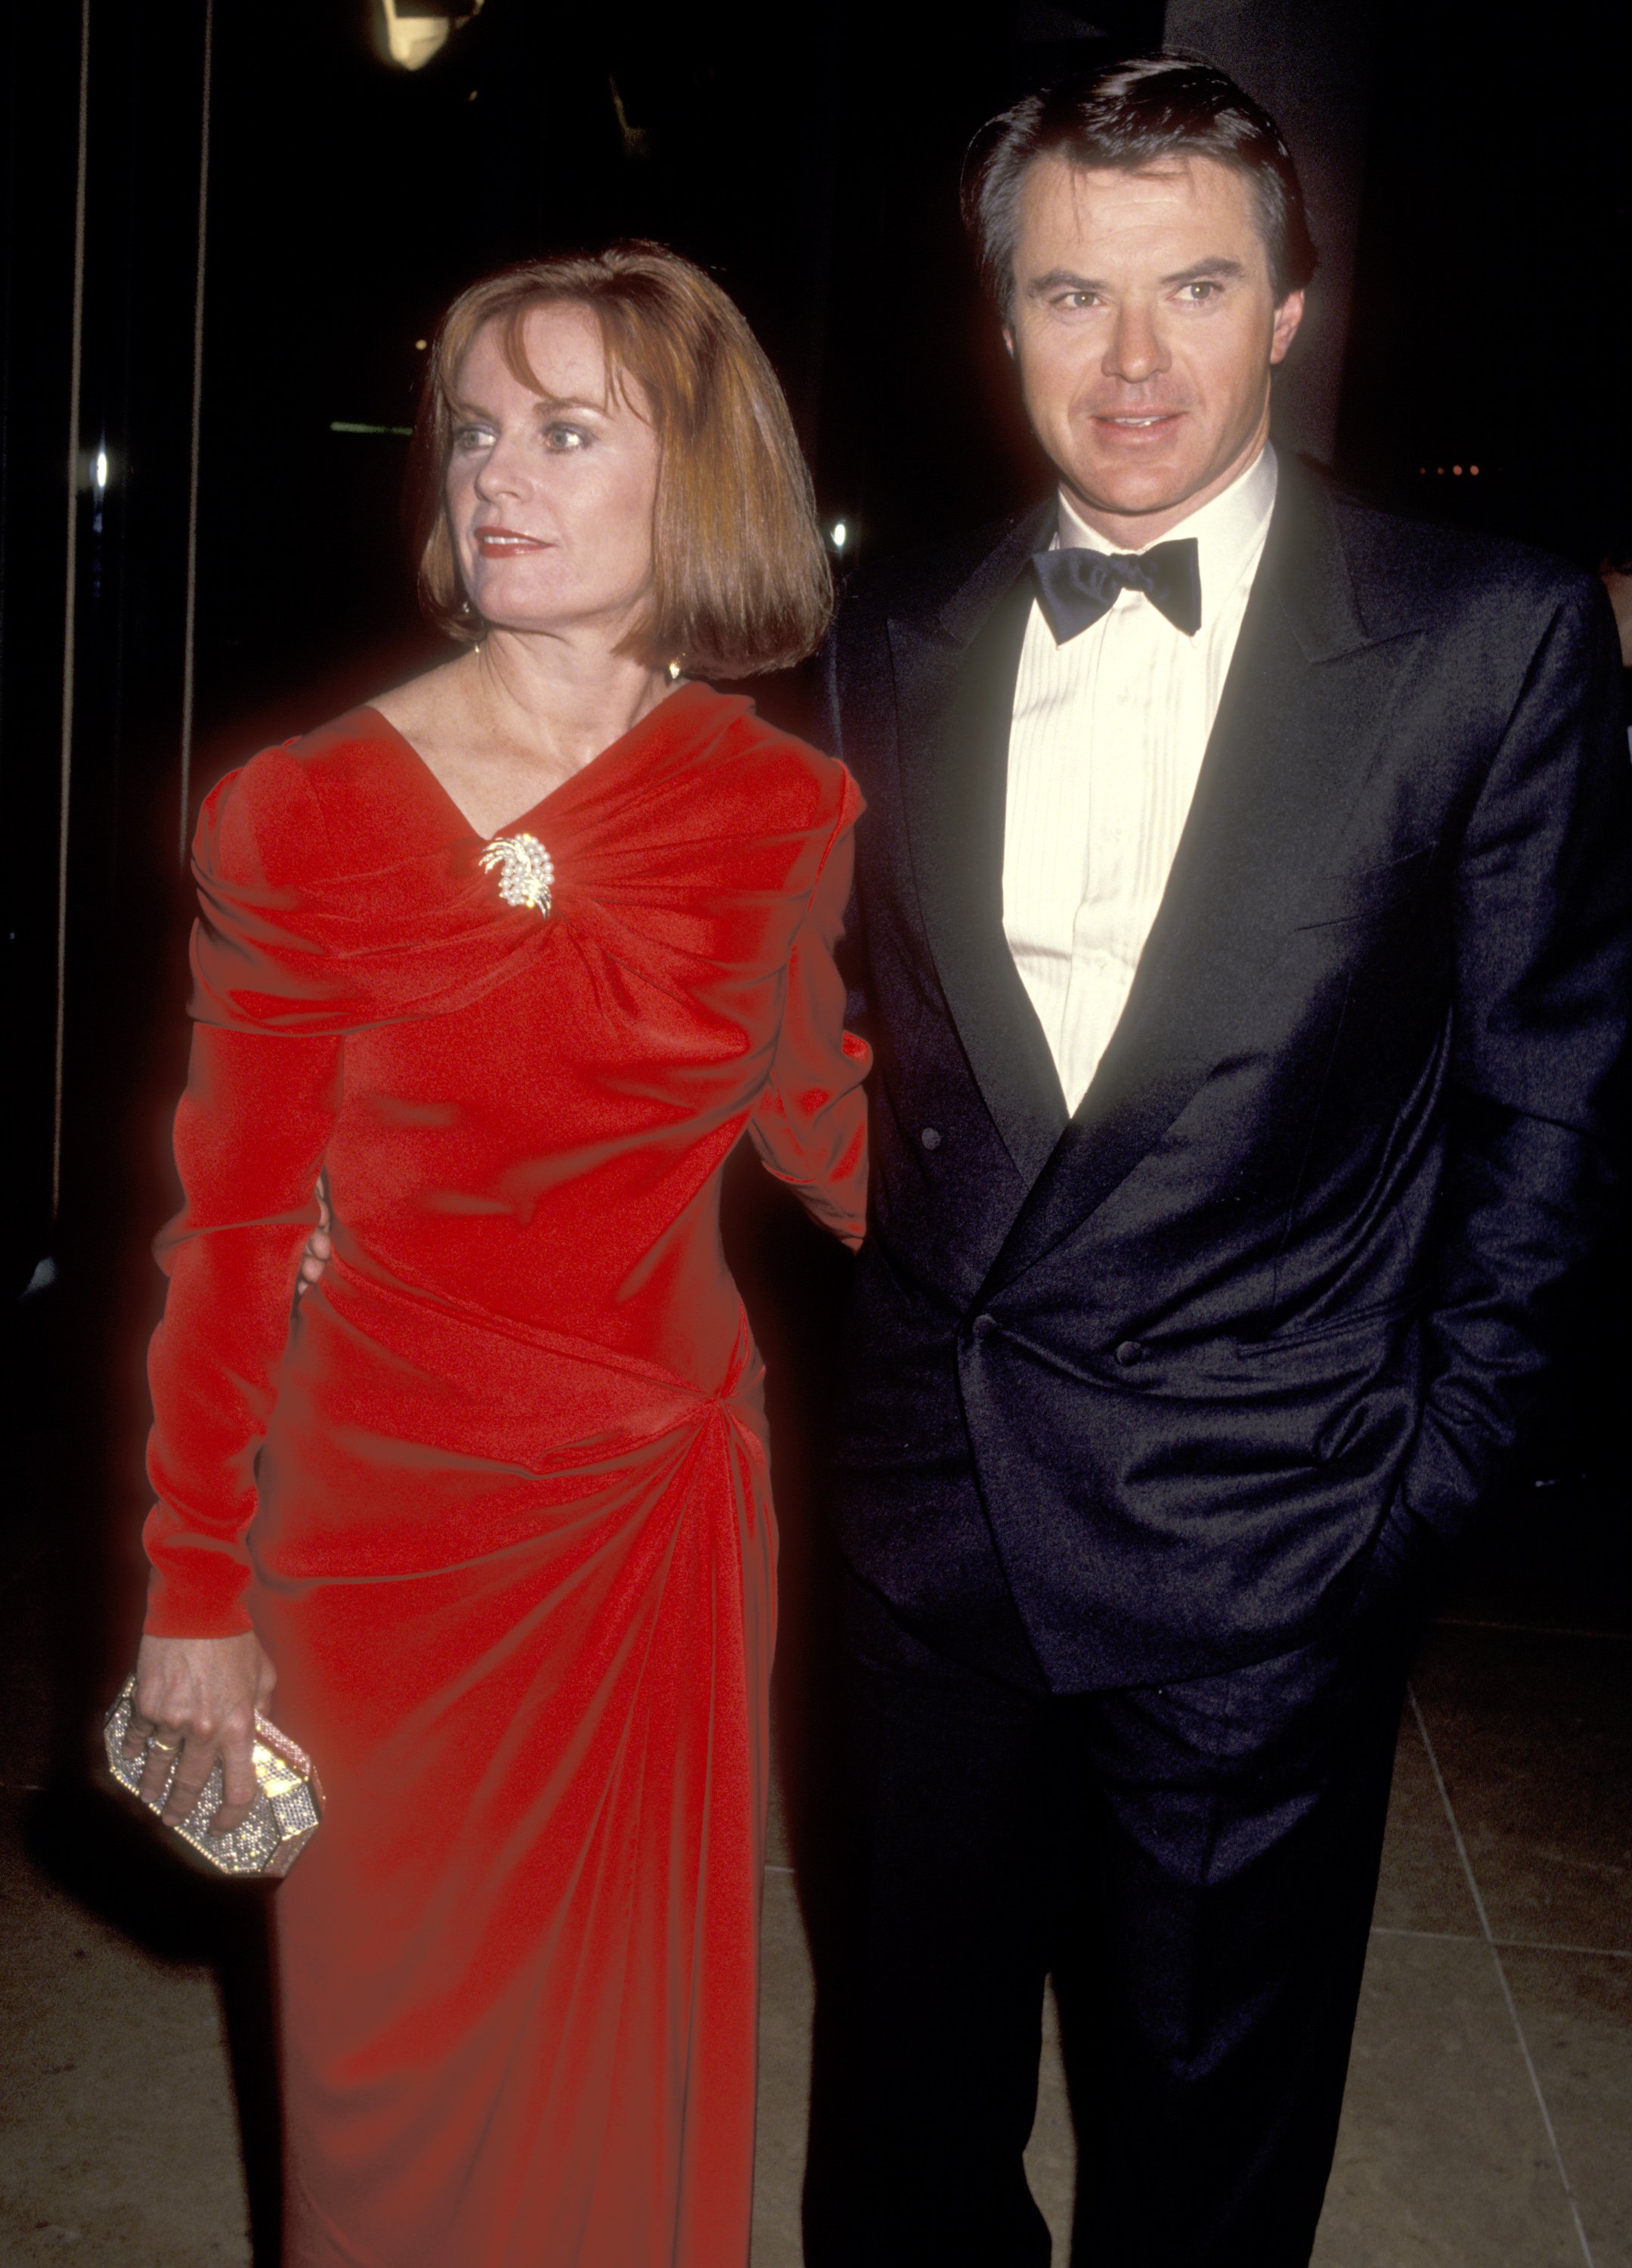 Actor Robert Urich and wife Heather Menzies attend the 48th Annual Golden Globe Awards 1991,  Beverly Hilton Hotel in Beverly Hills, California. | Source: Getty Images